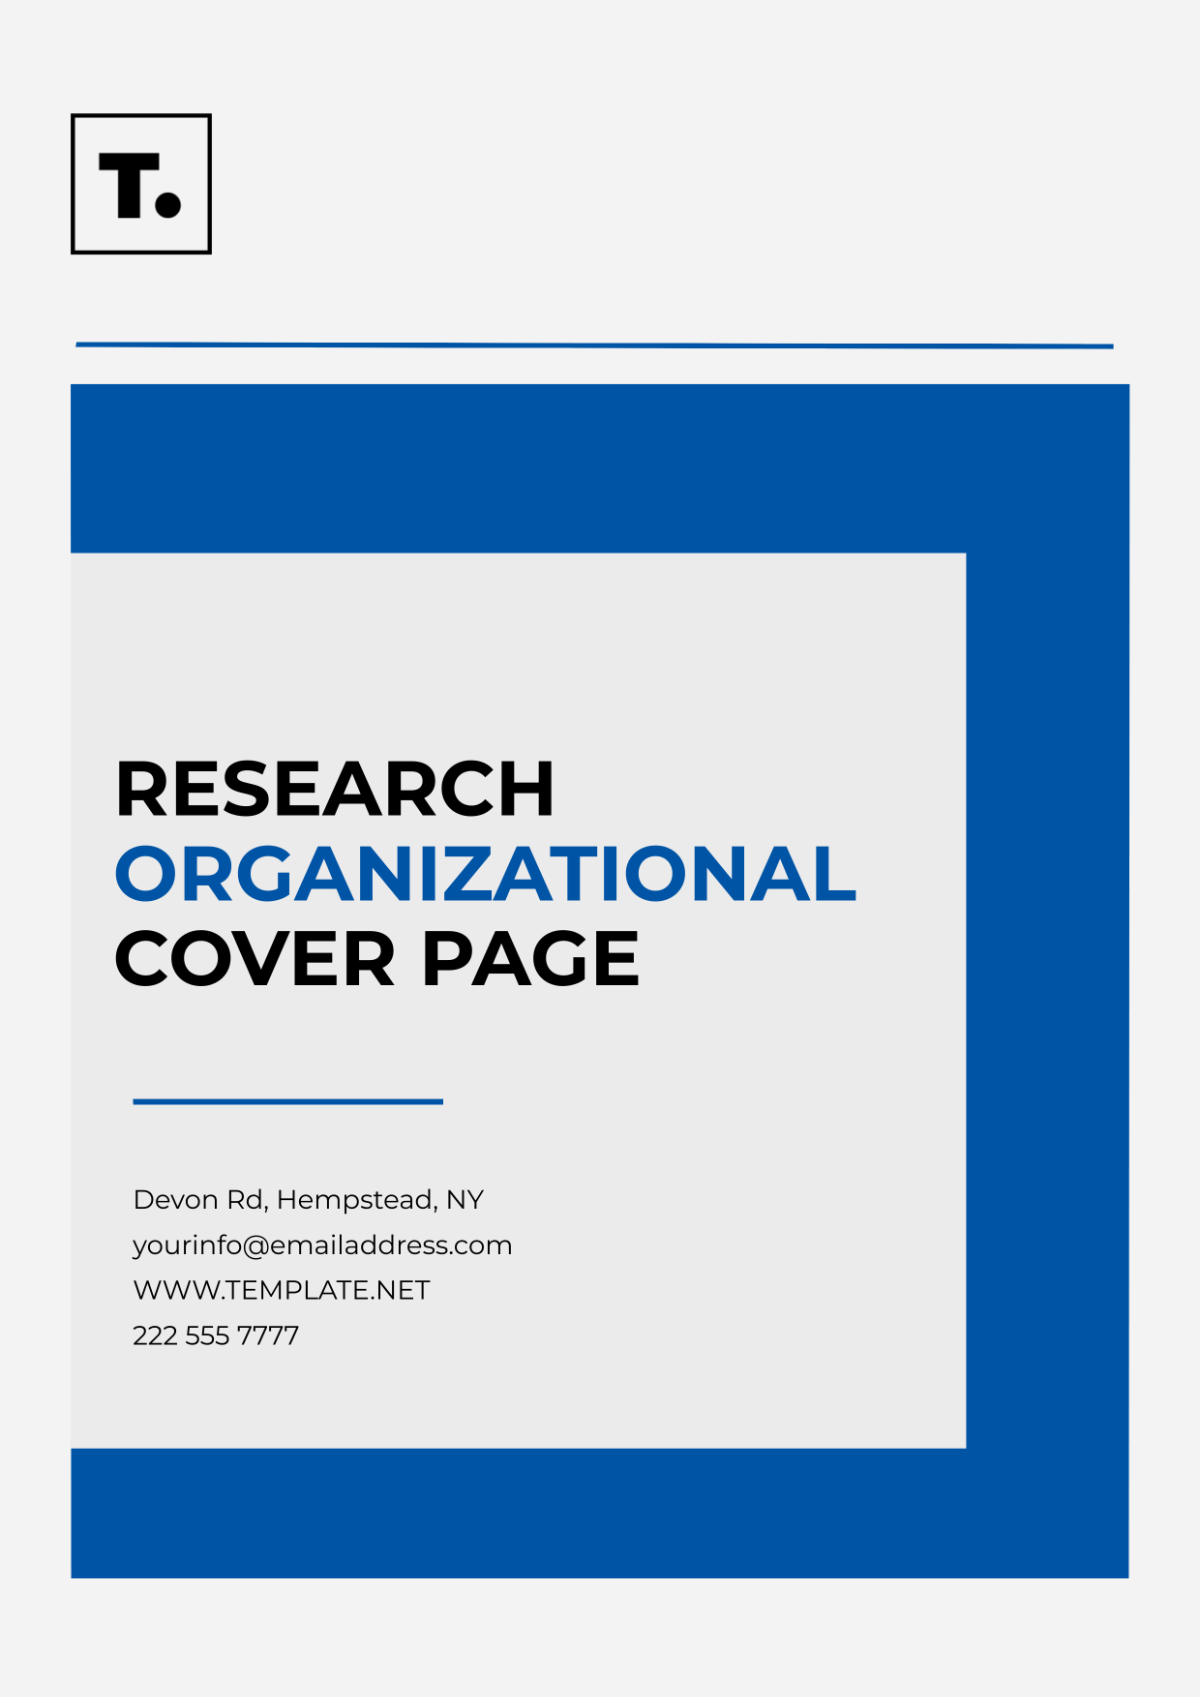 Research Organizational Cover Page